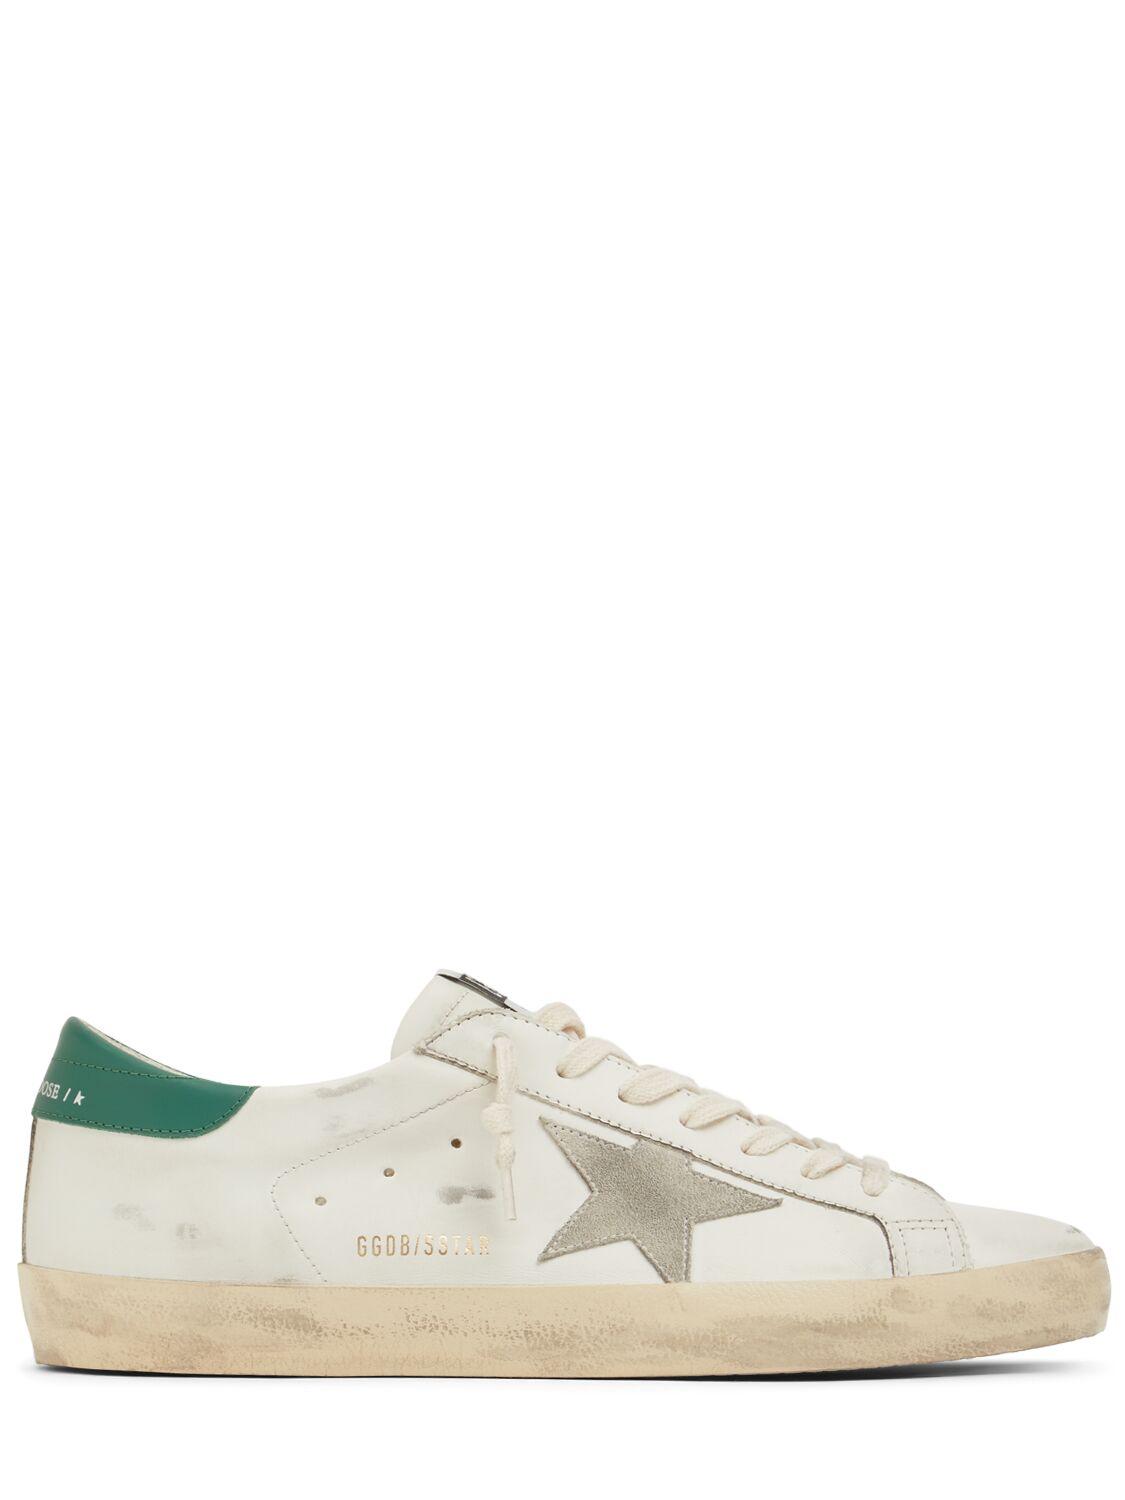 Golden Goose Super Star Leather Sneakers In White,green